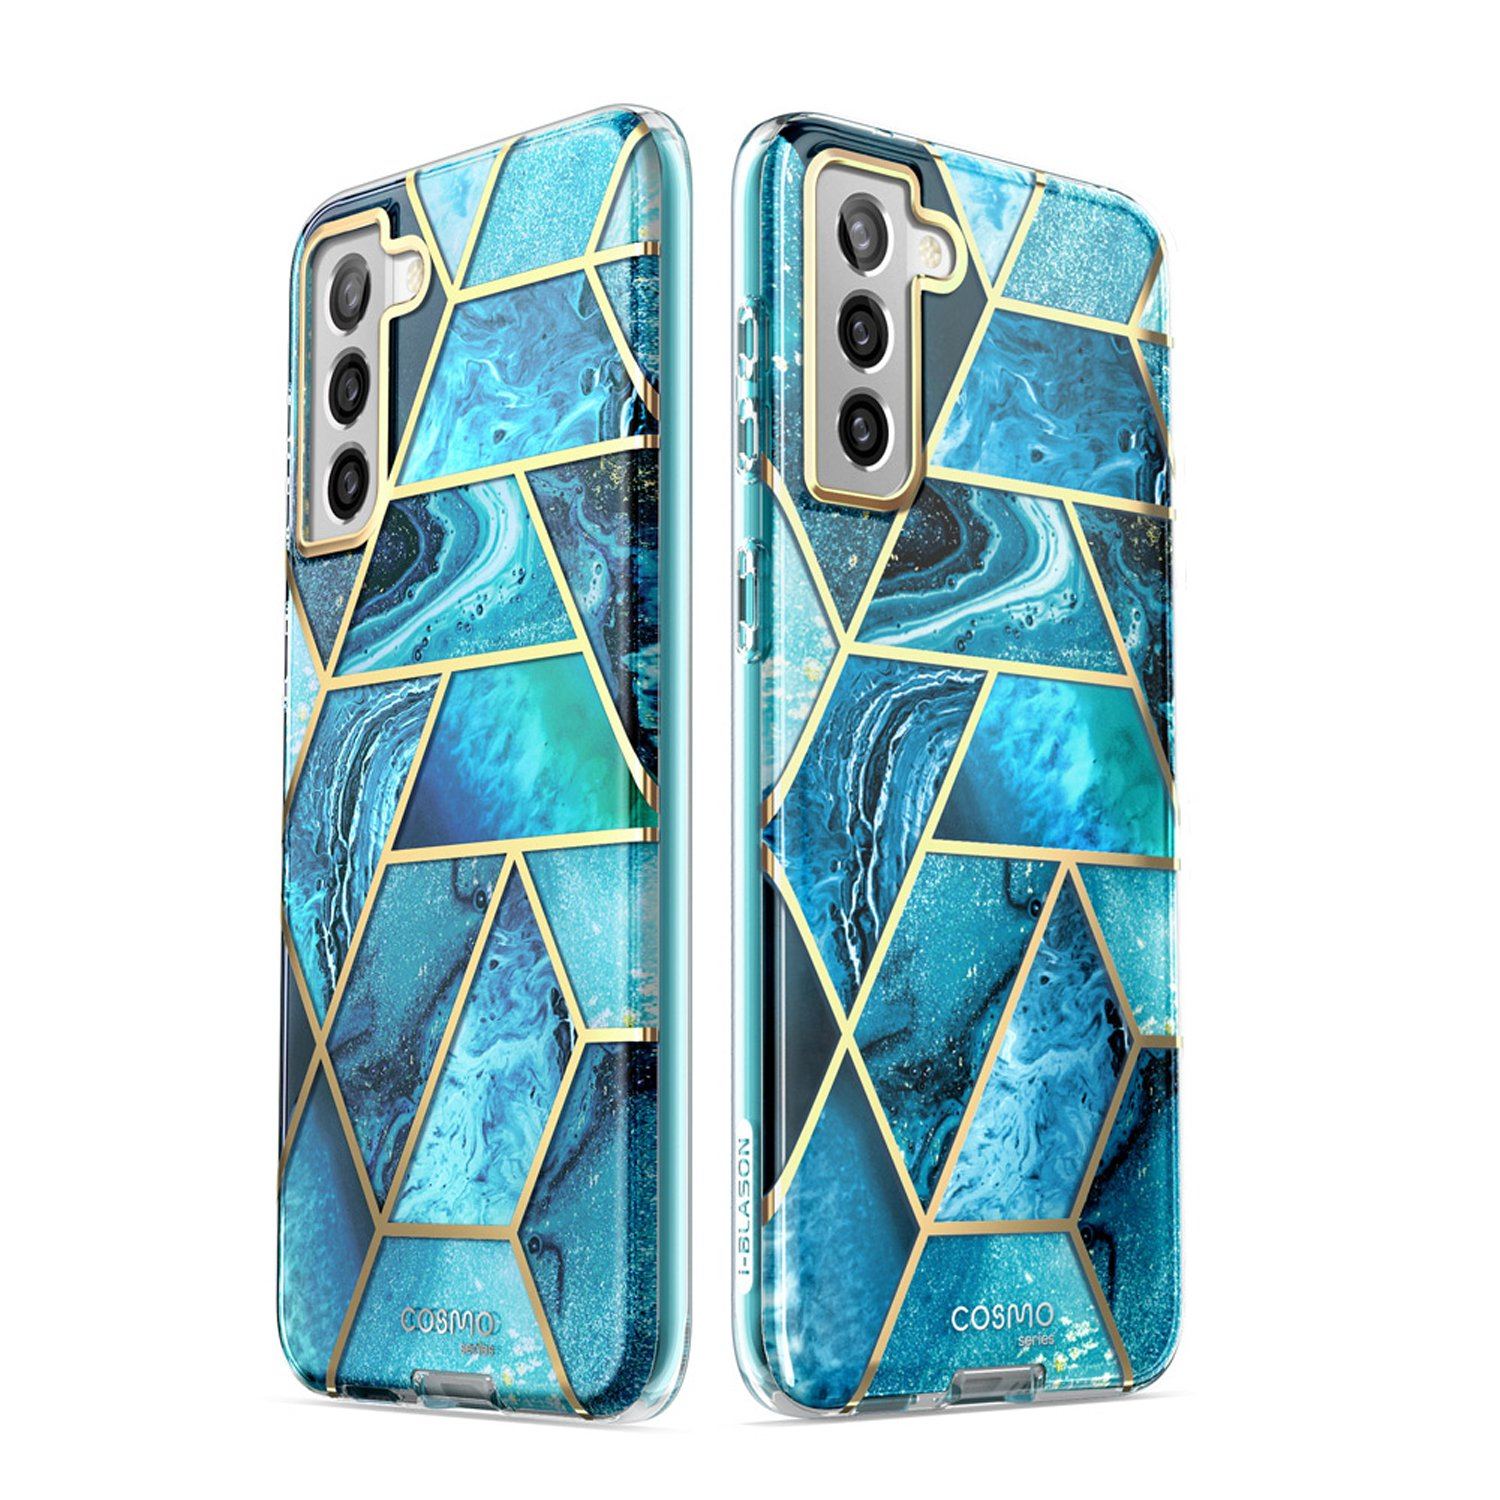 i-Blason Cosmo Series Case for Samsung Galaxy S21(Without Screen Protector), Ocean S21 i-Blason 